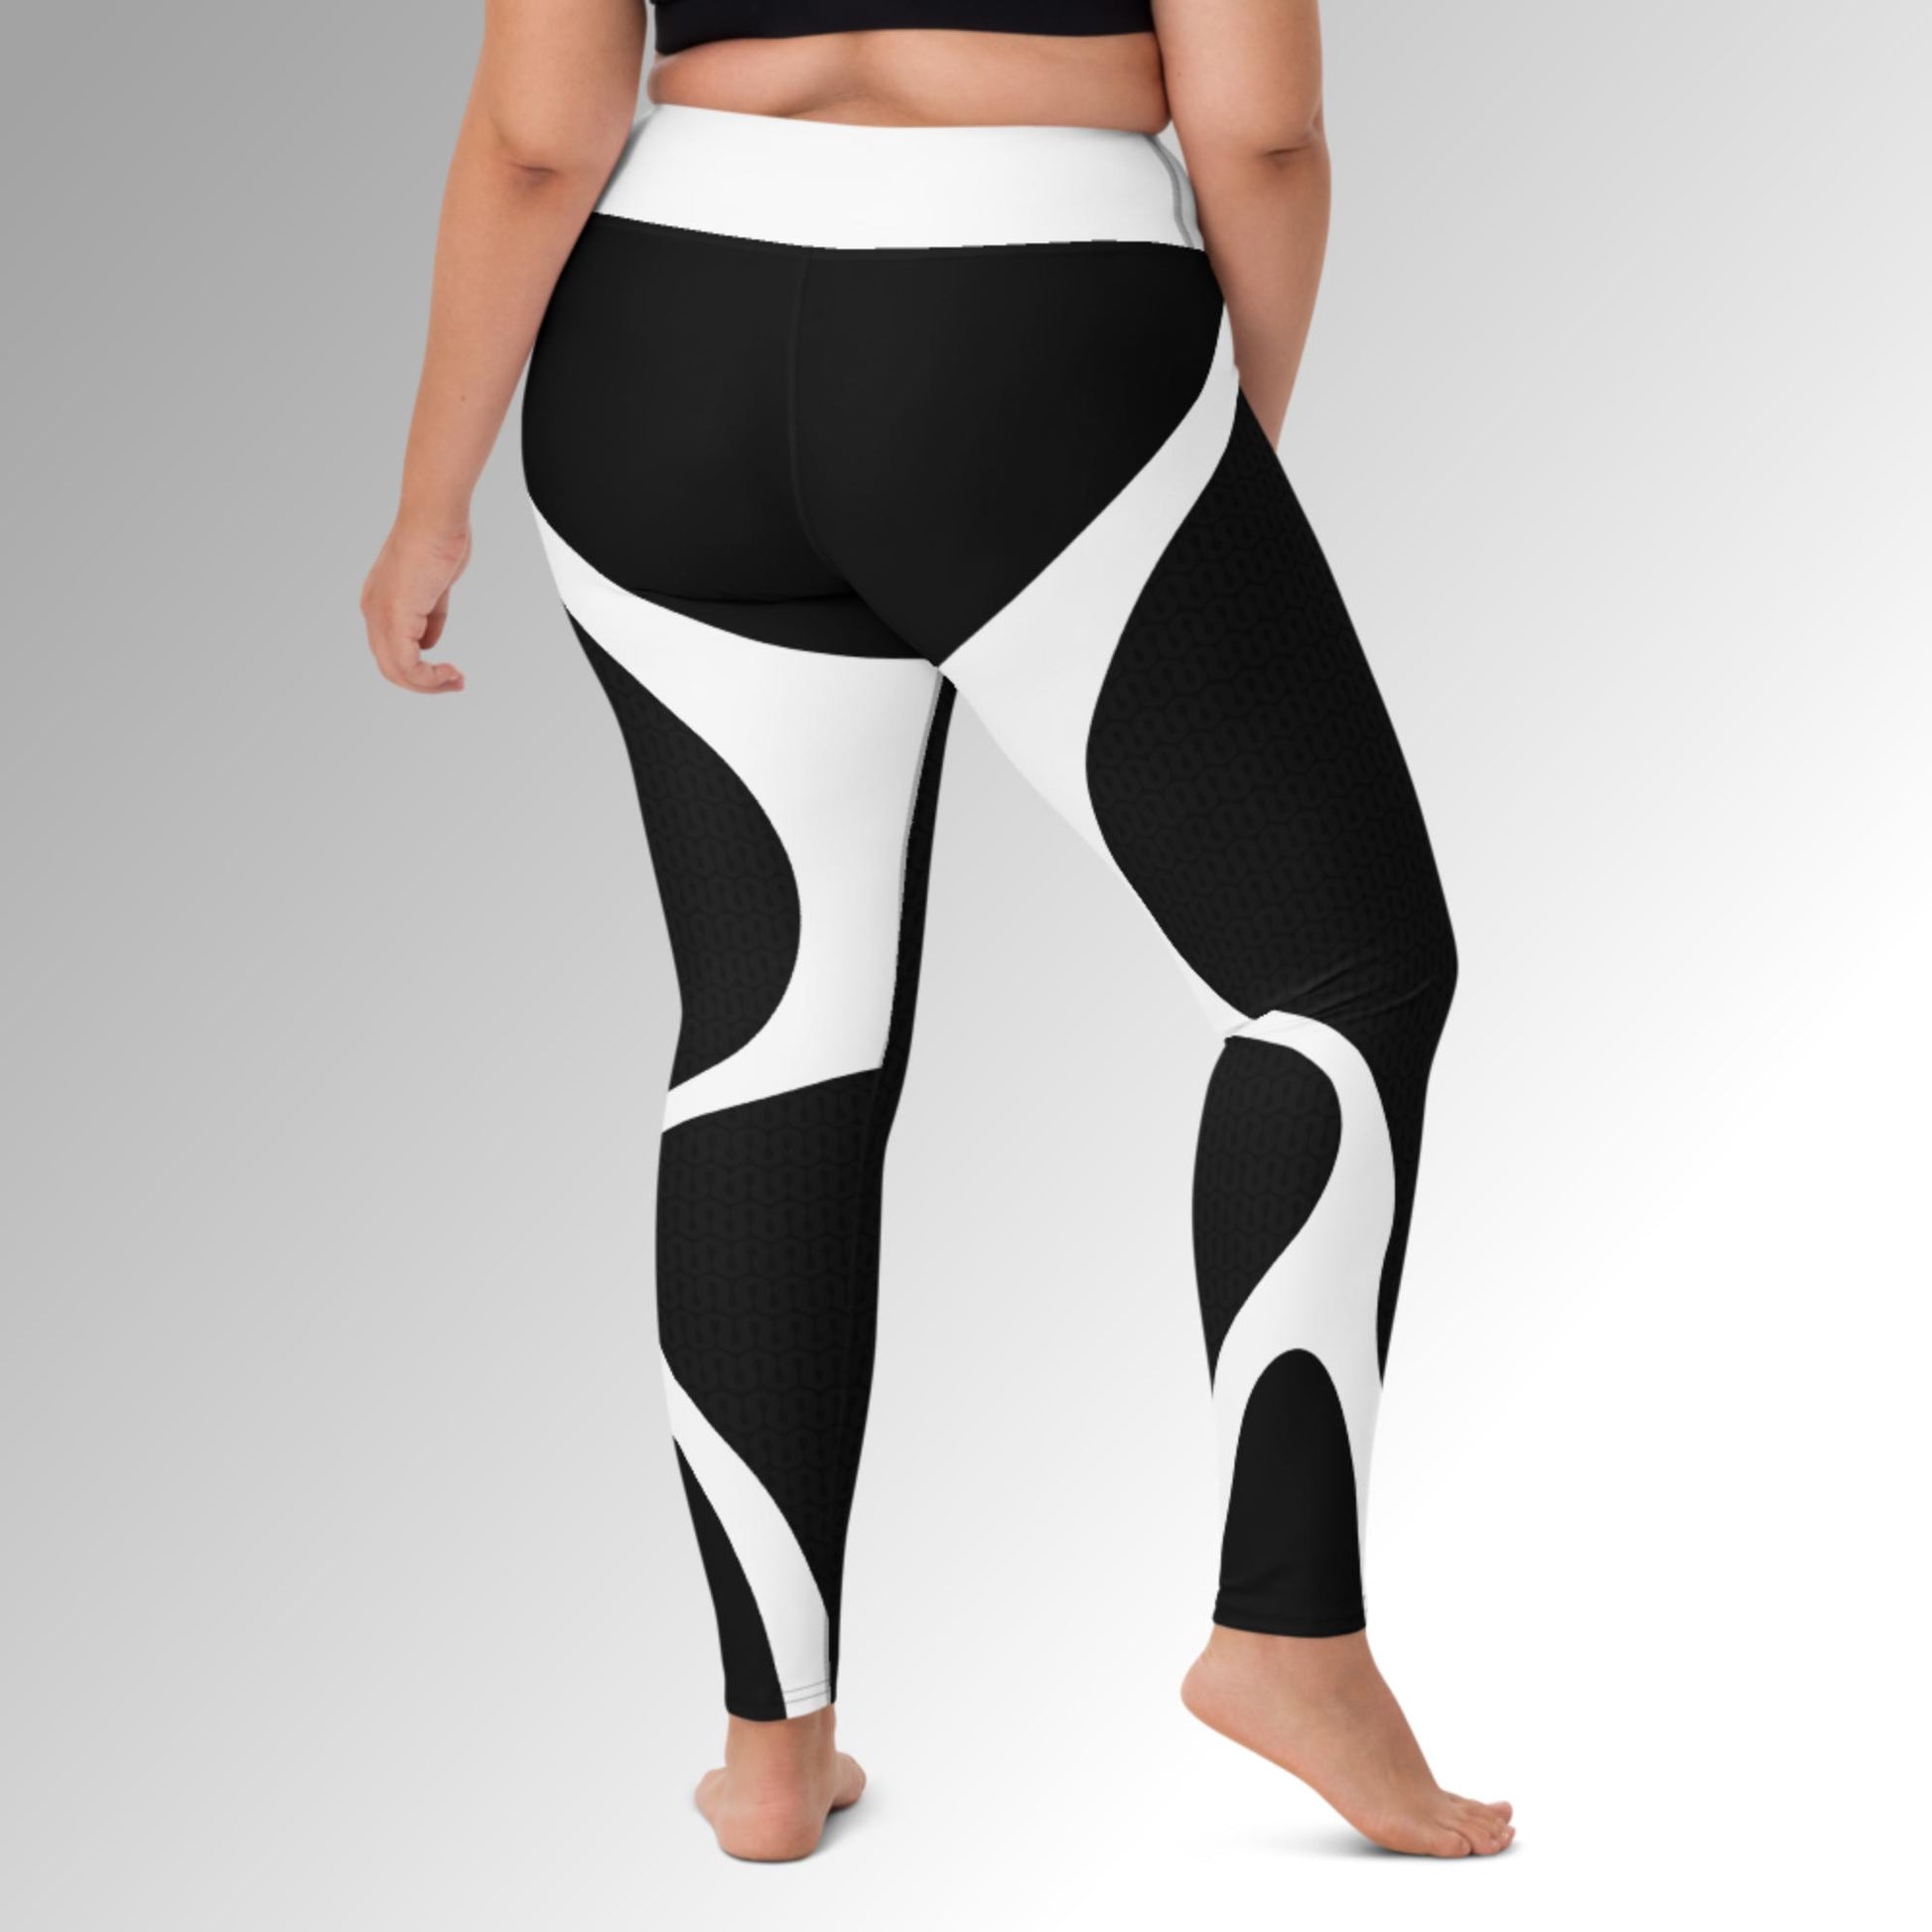 ZenStretch Leggings by Jain  Stretchy and Comfortable Yoga Pants